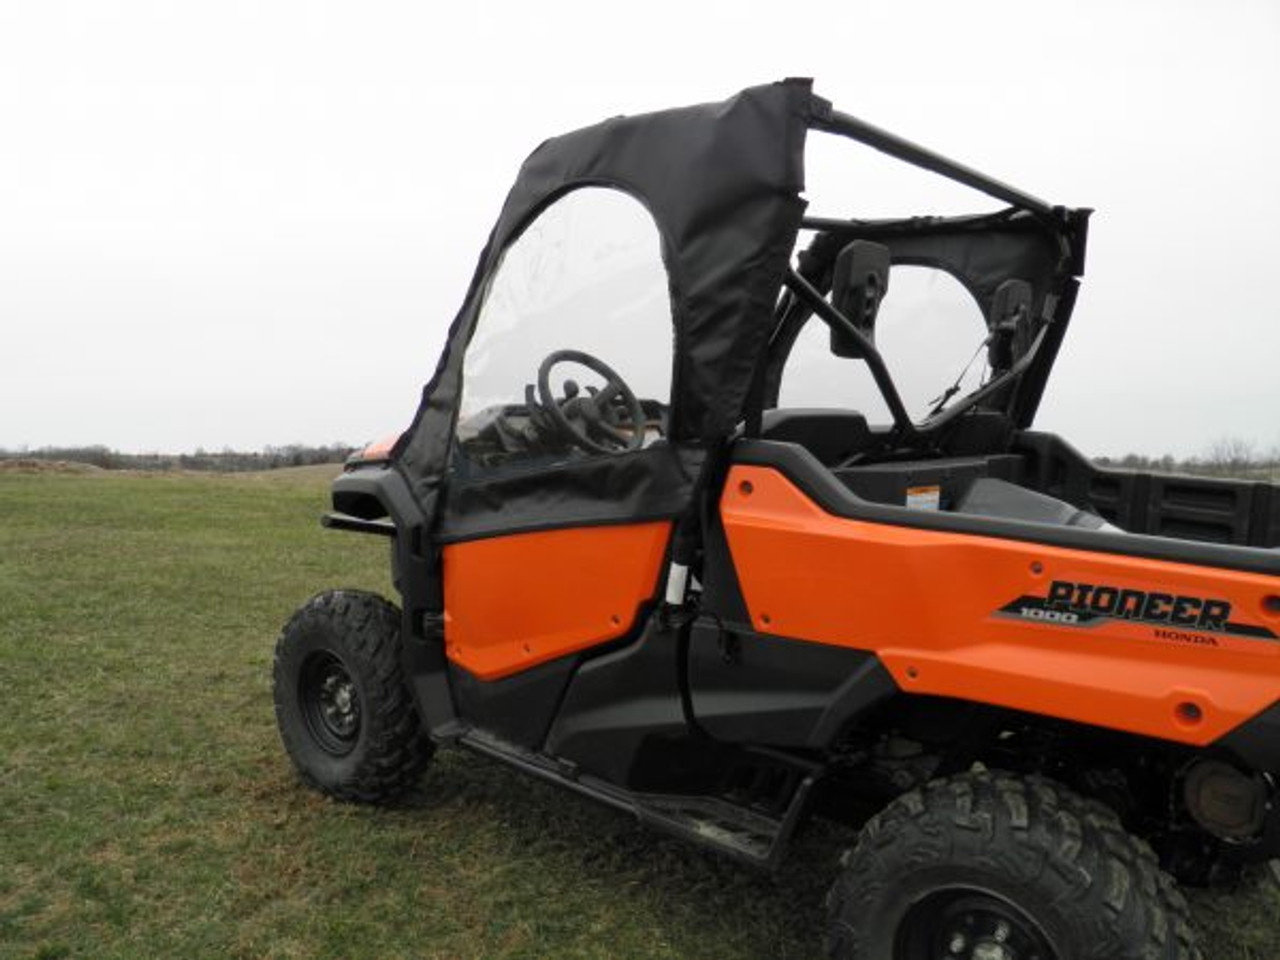 Honda Pioneer 1000 Soft Upper Doors rear and side angle view